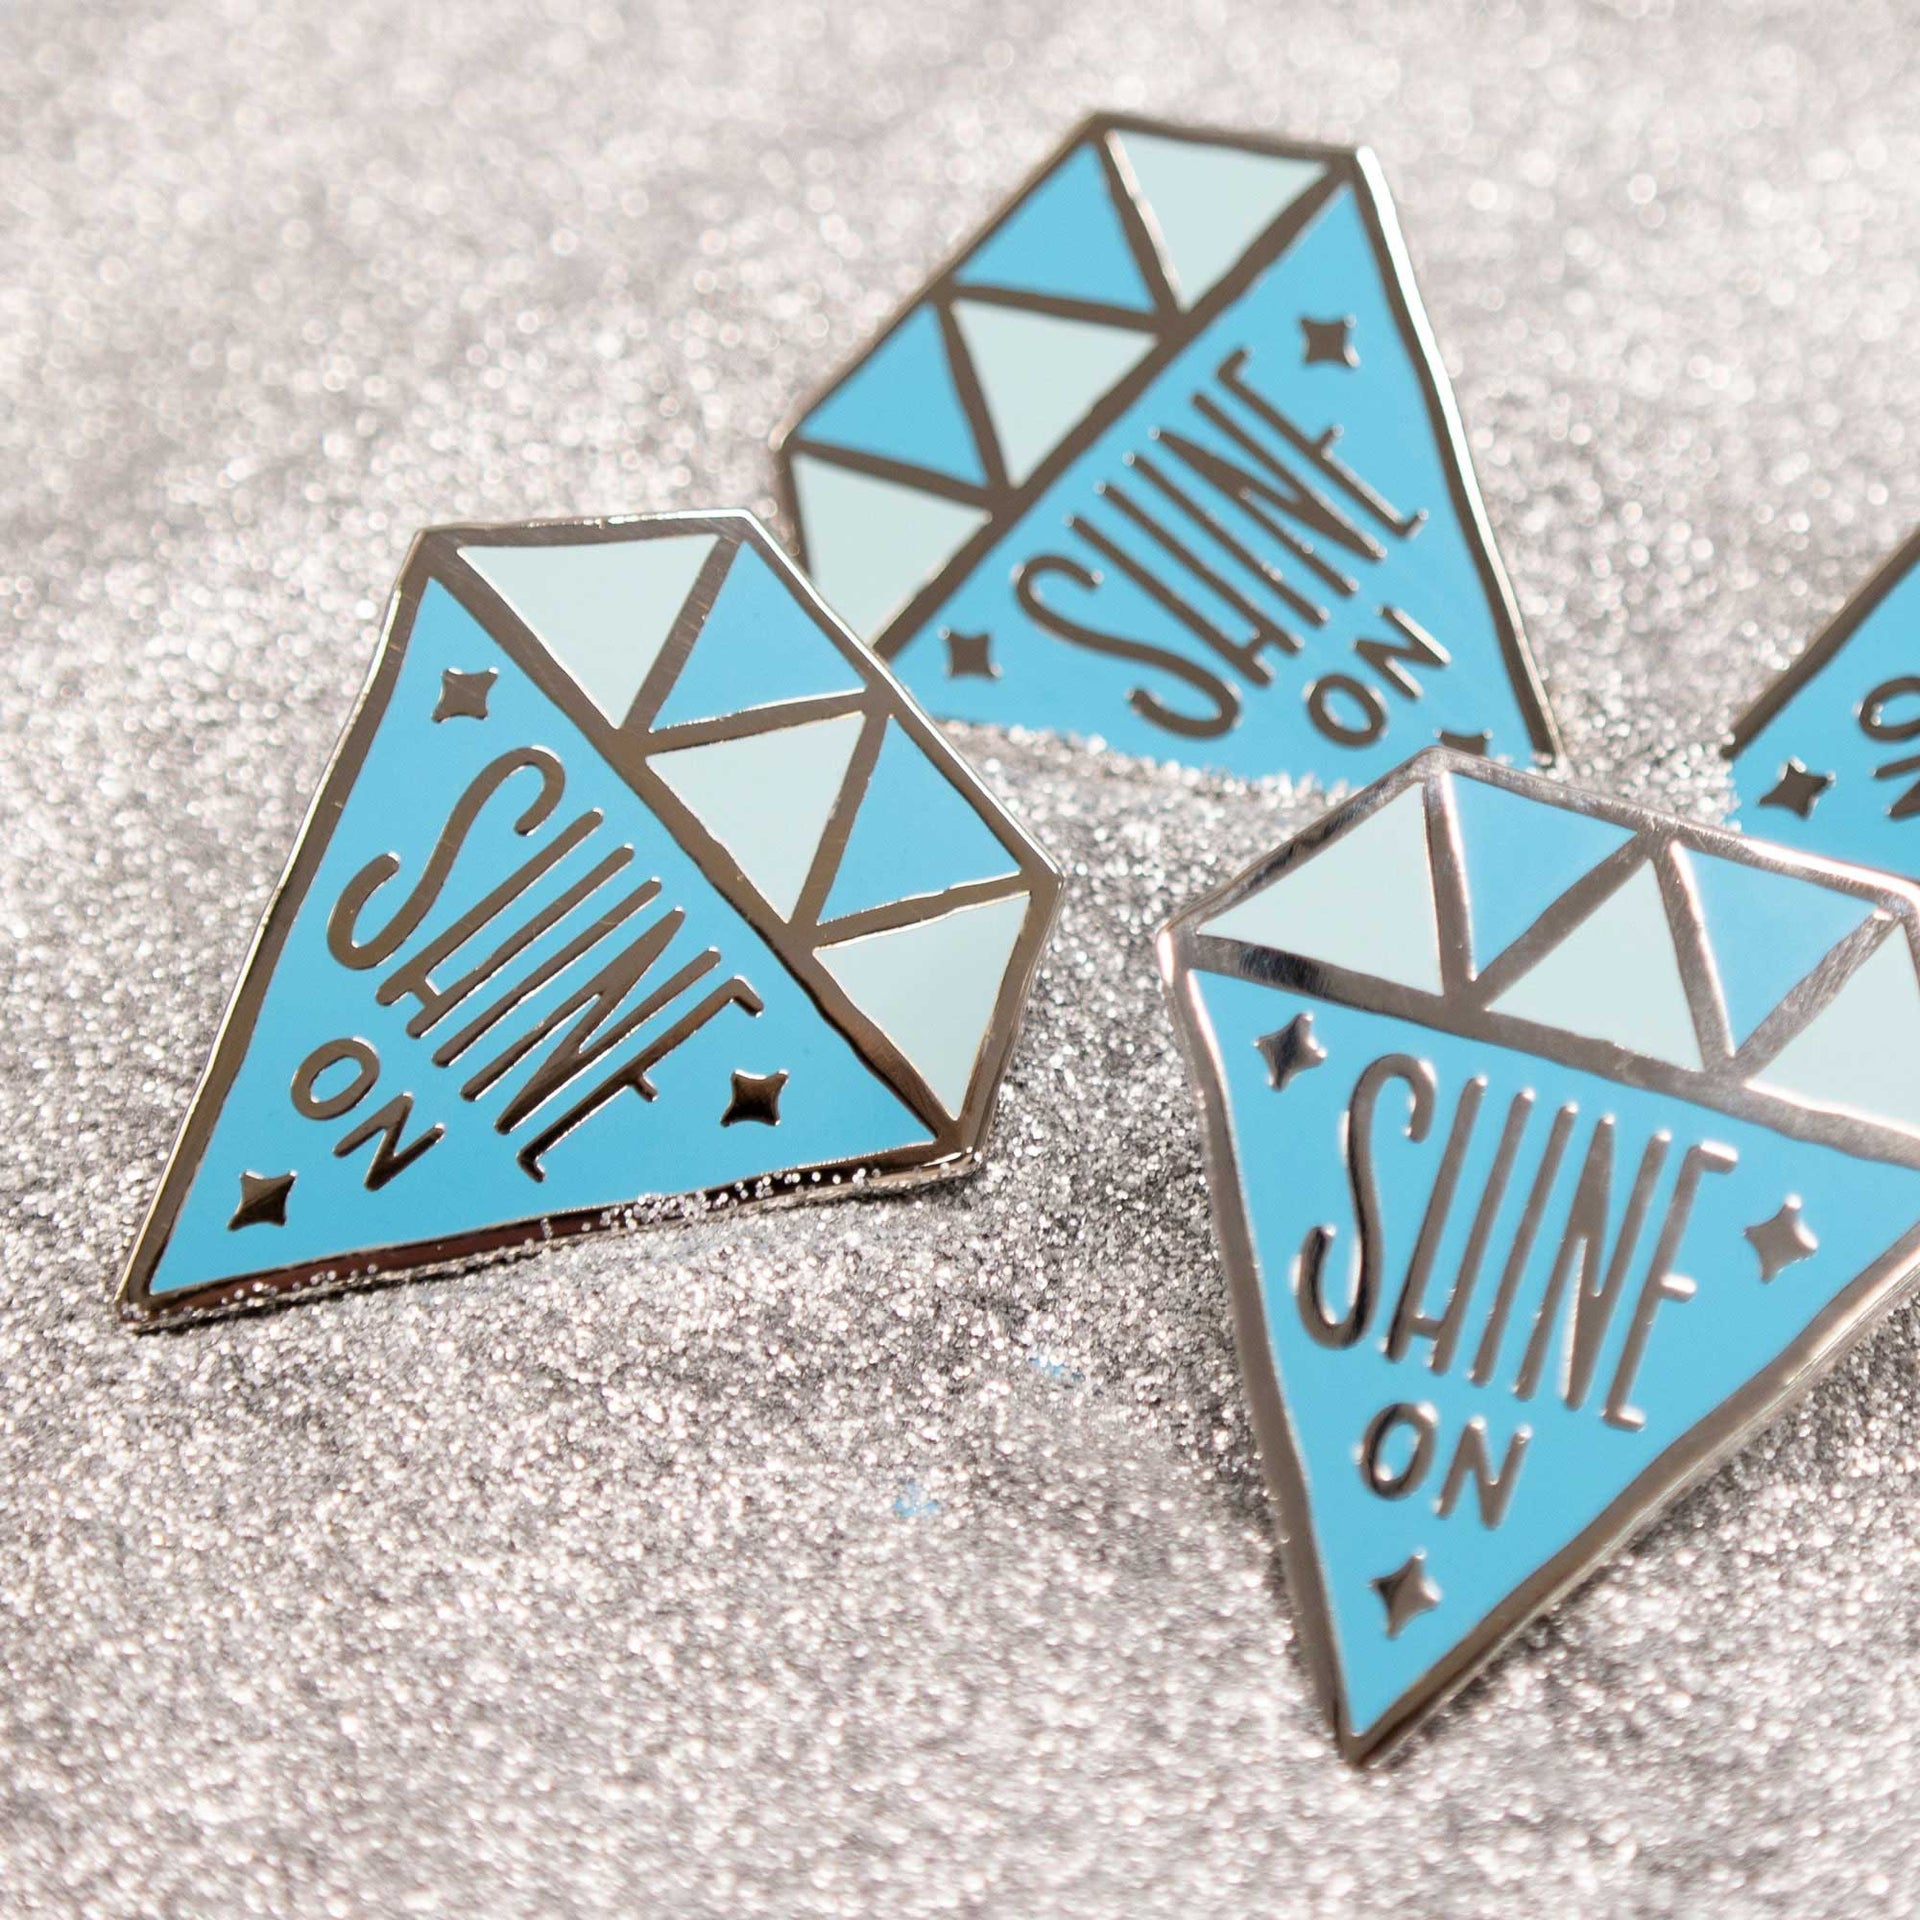 diamond shaped enamel pins that says "shine on" in silver glitter